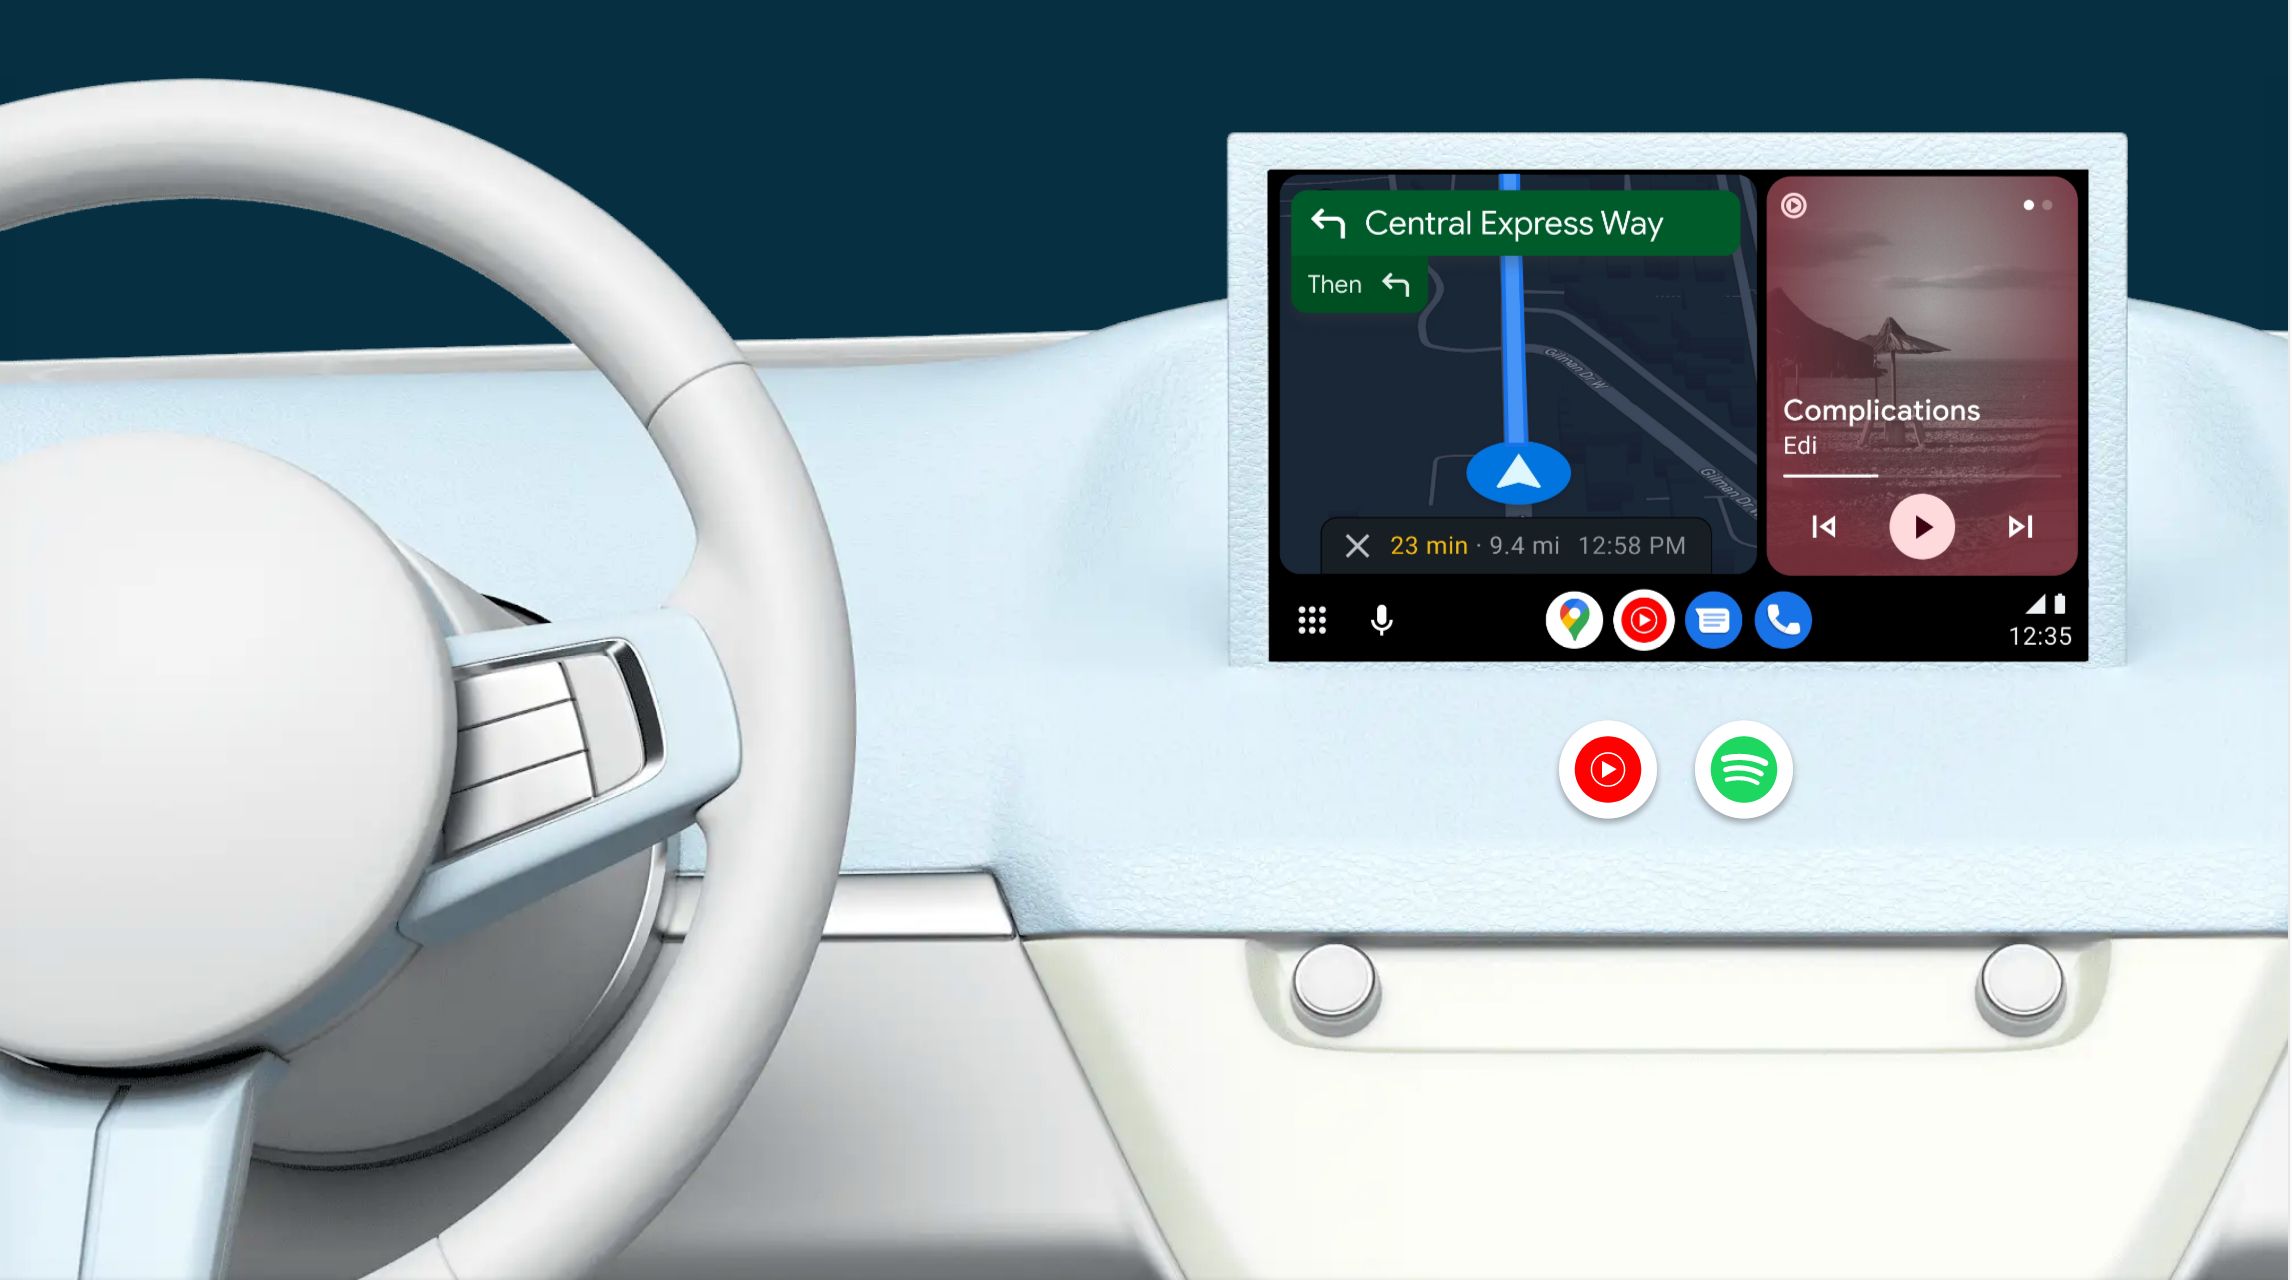 What is Android Auto and how does it work? - Android Authority